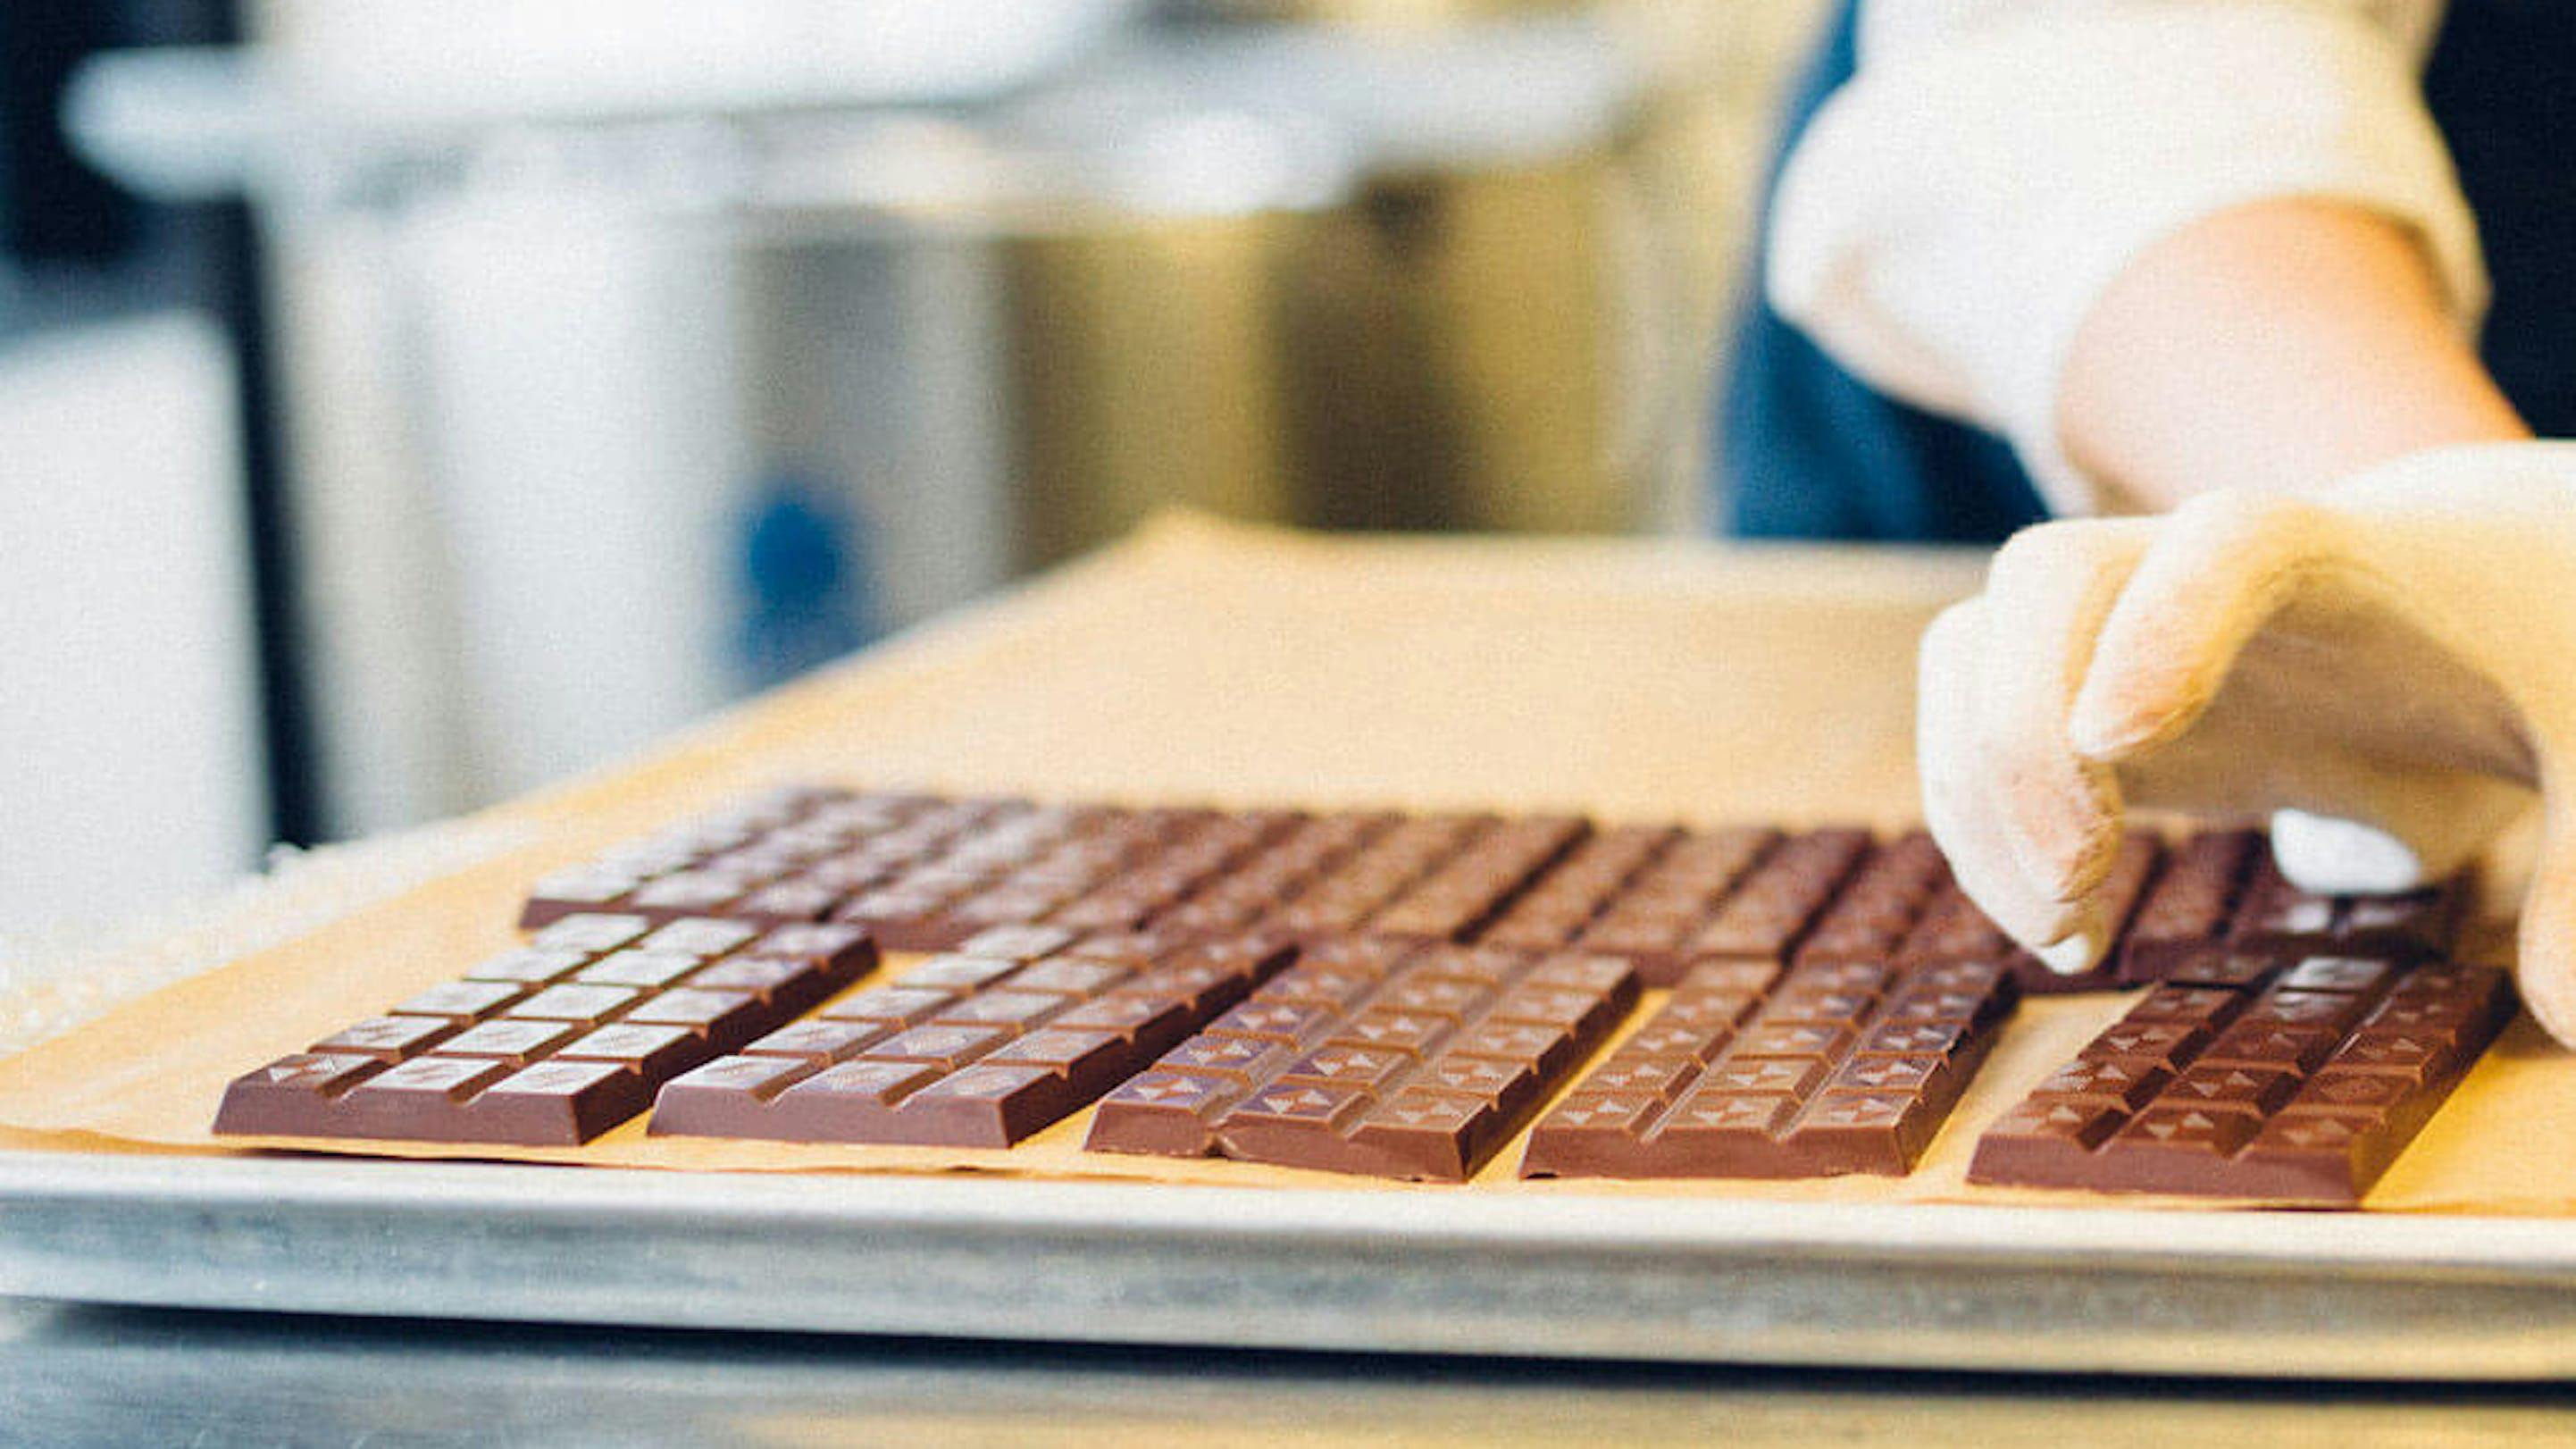 gently placing canadian artisan chocolate on tray